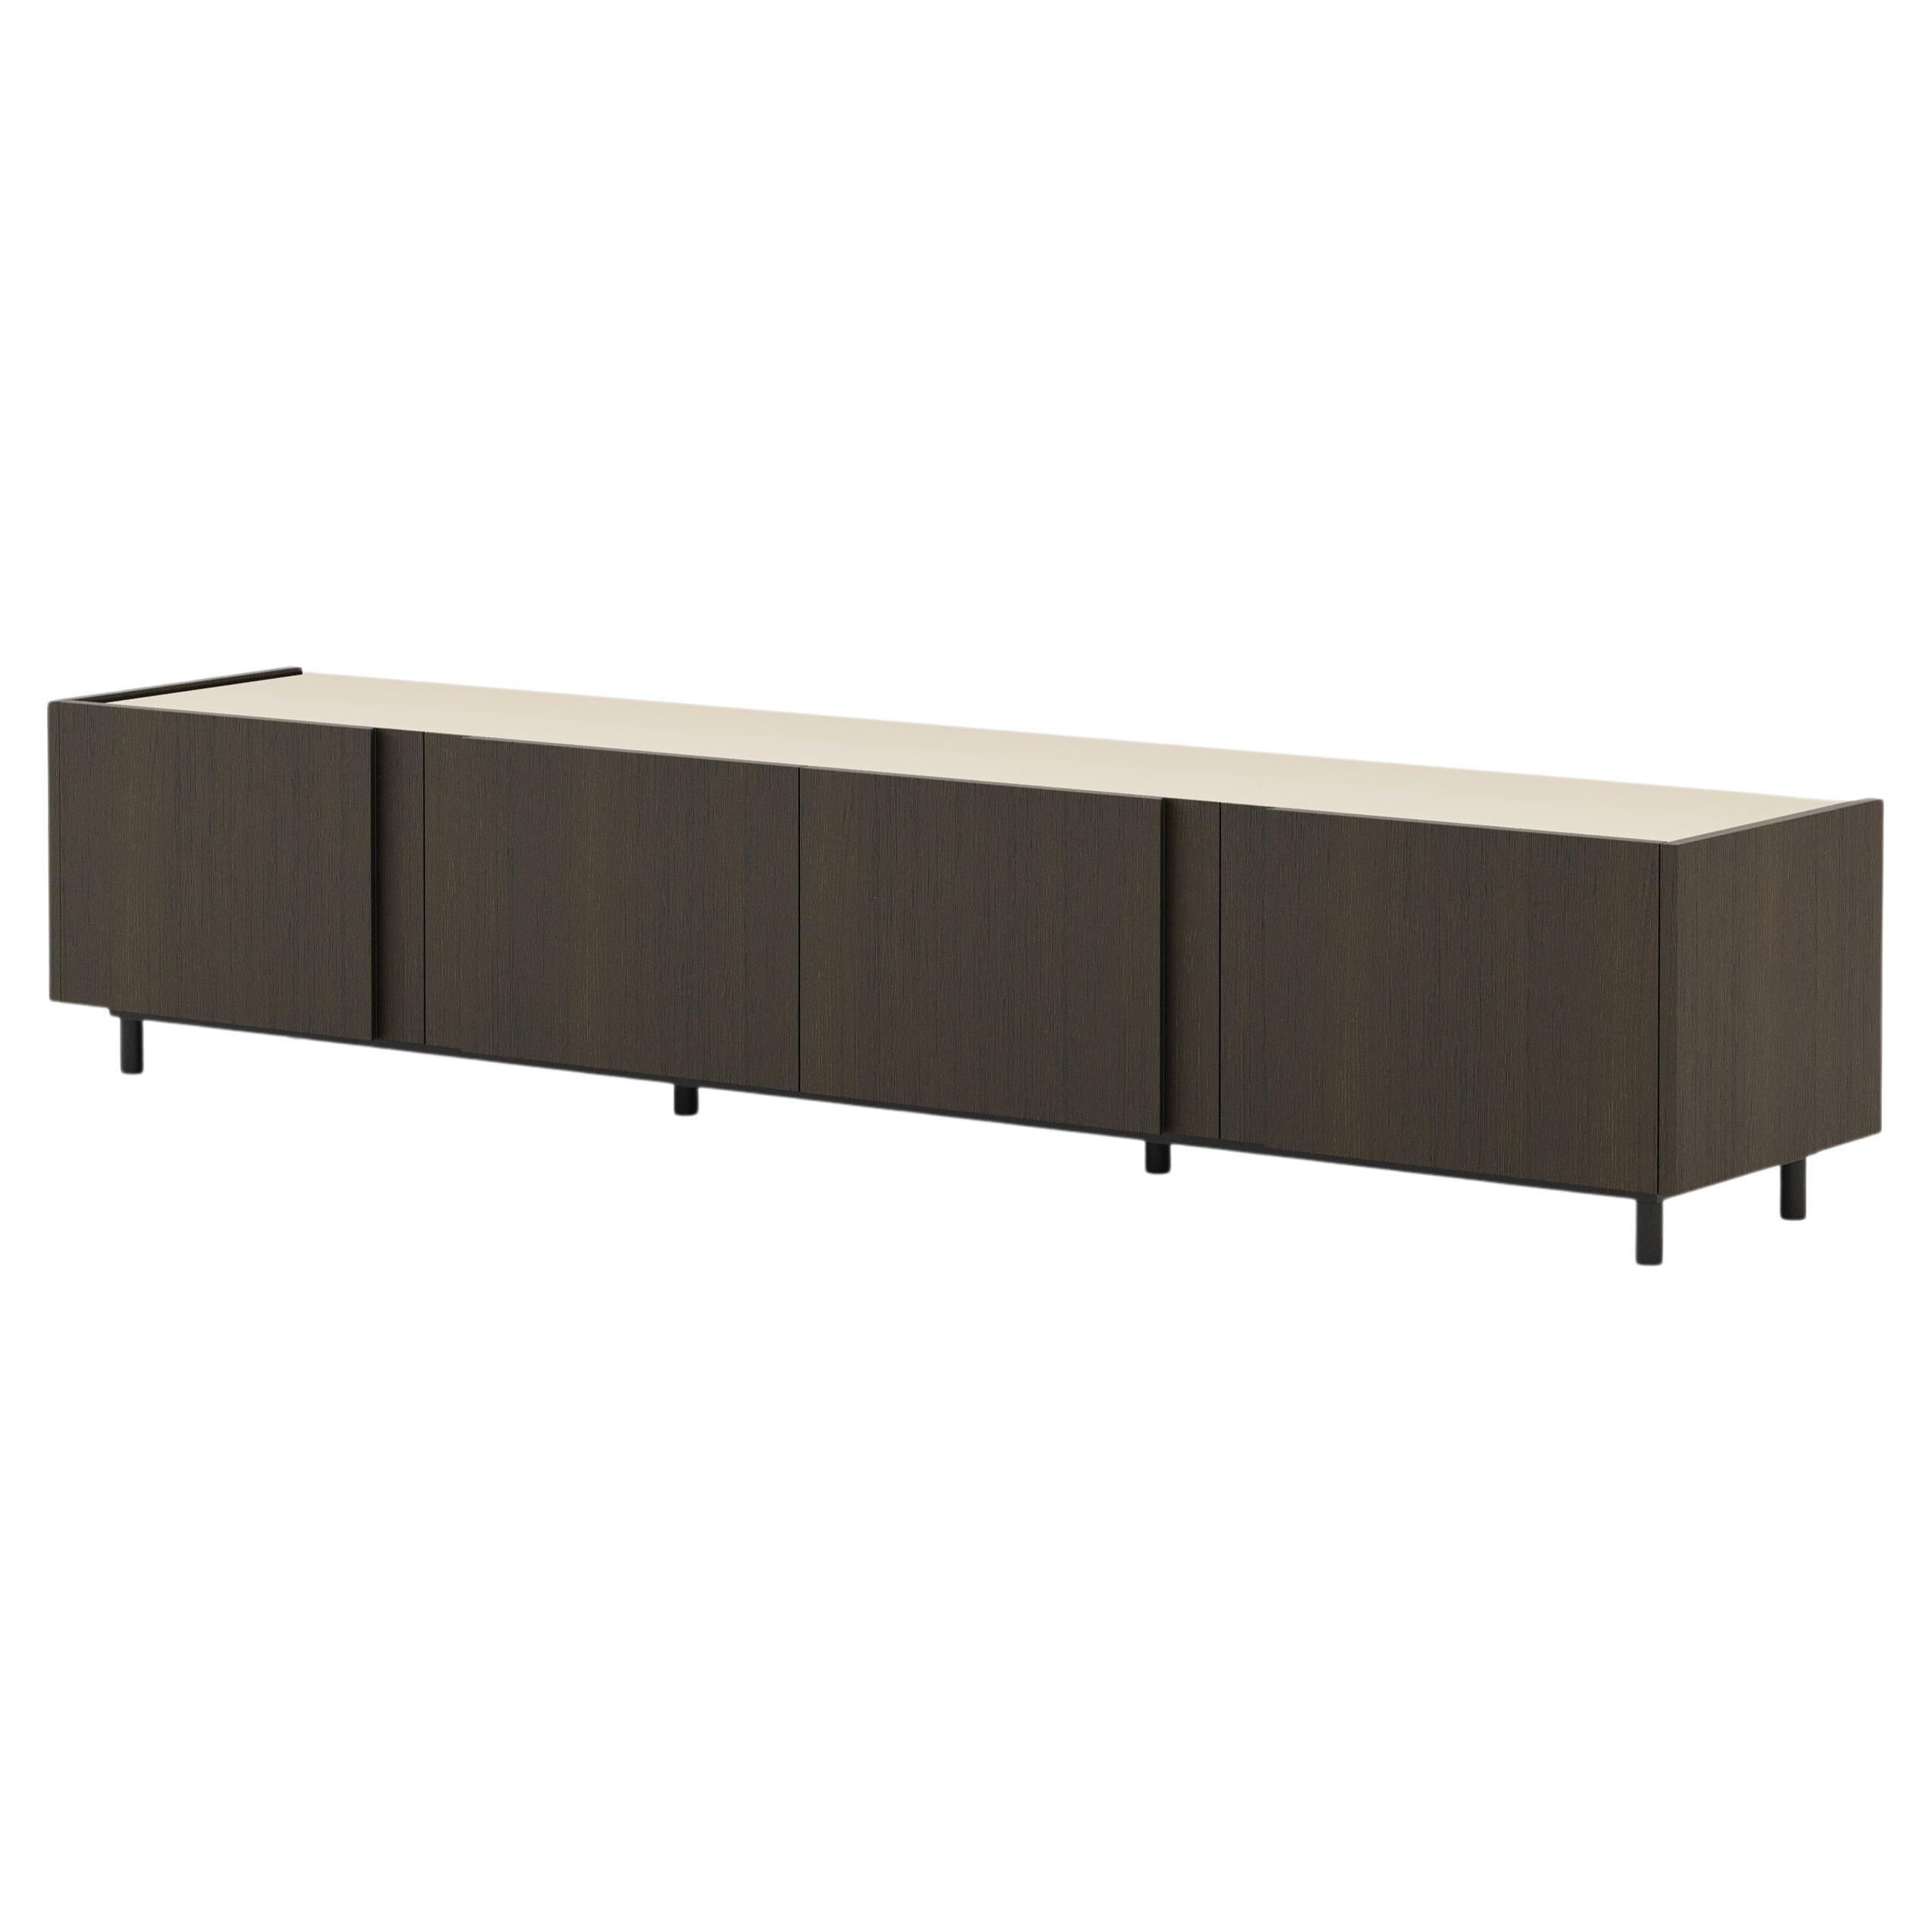 Modern style Sevilha Tv Cabinet made with Walnut, iron and glass, Handmade